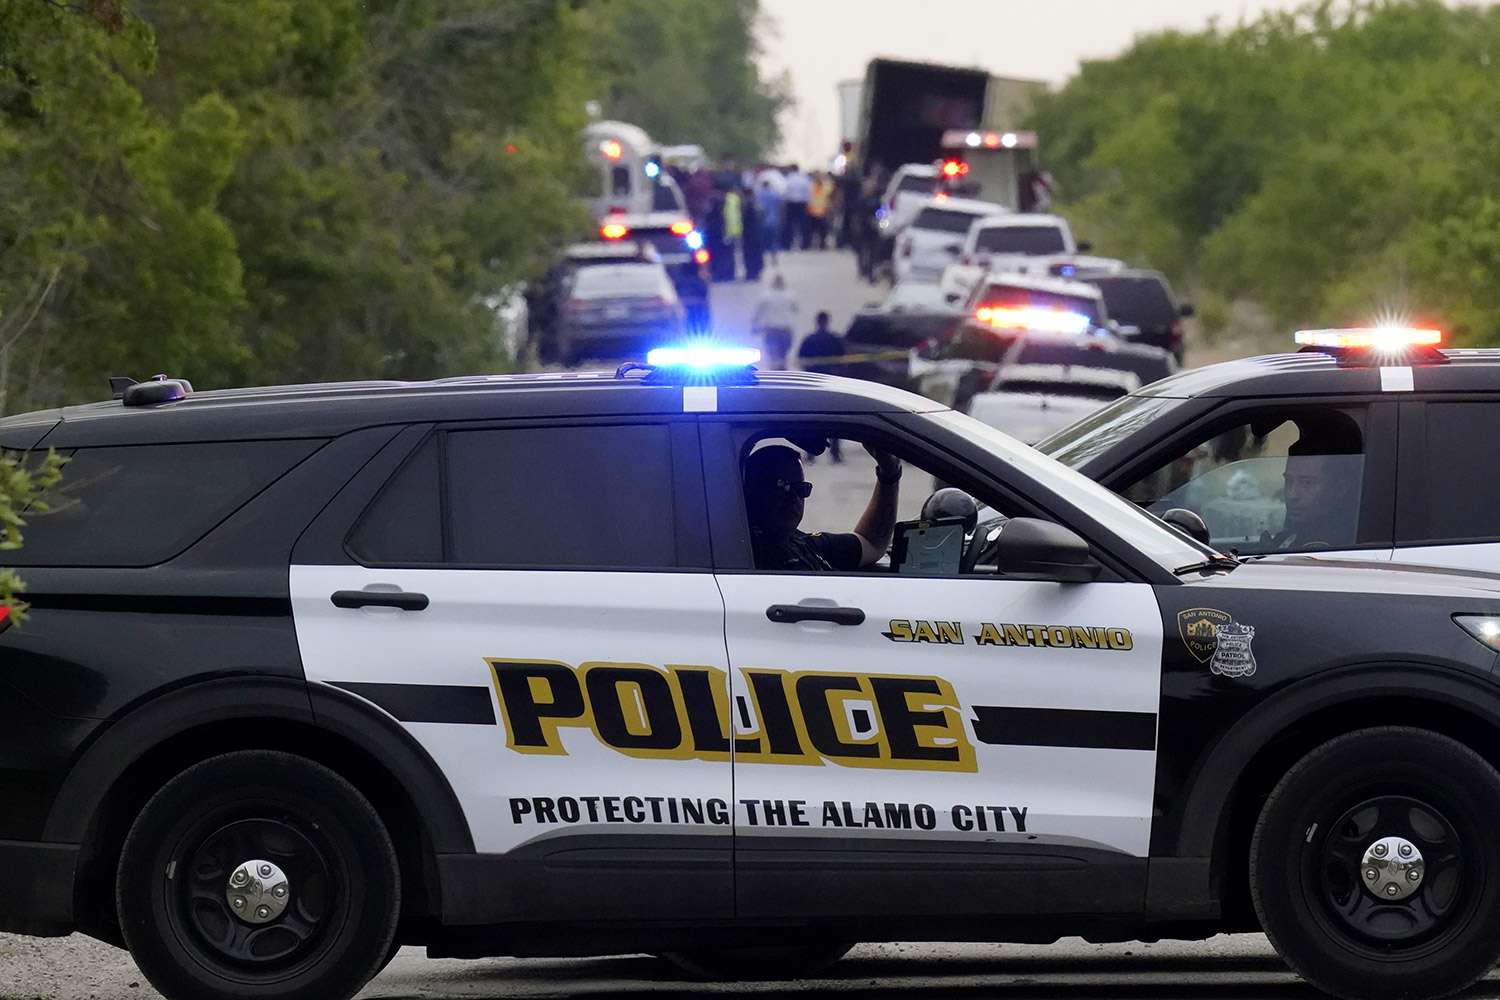  46 People Dead, 16 Hospitalized After Being Found Inside 18-Wheeler in San Antonio 